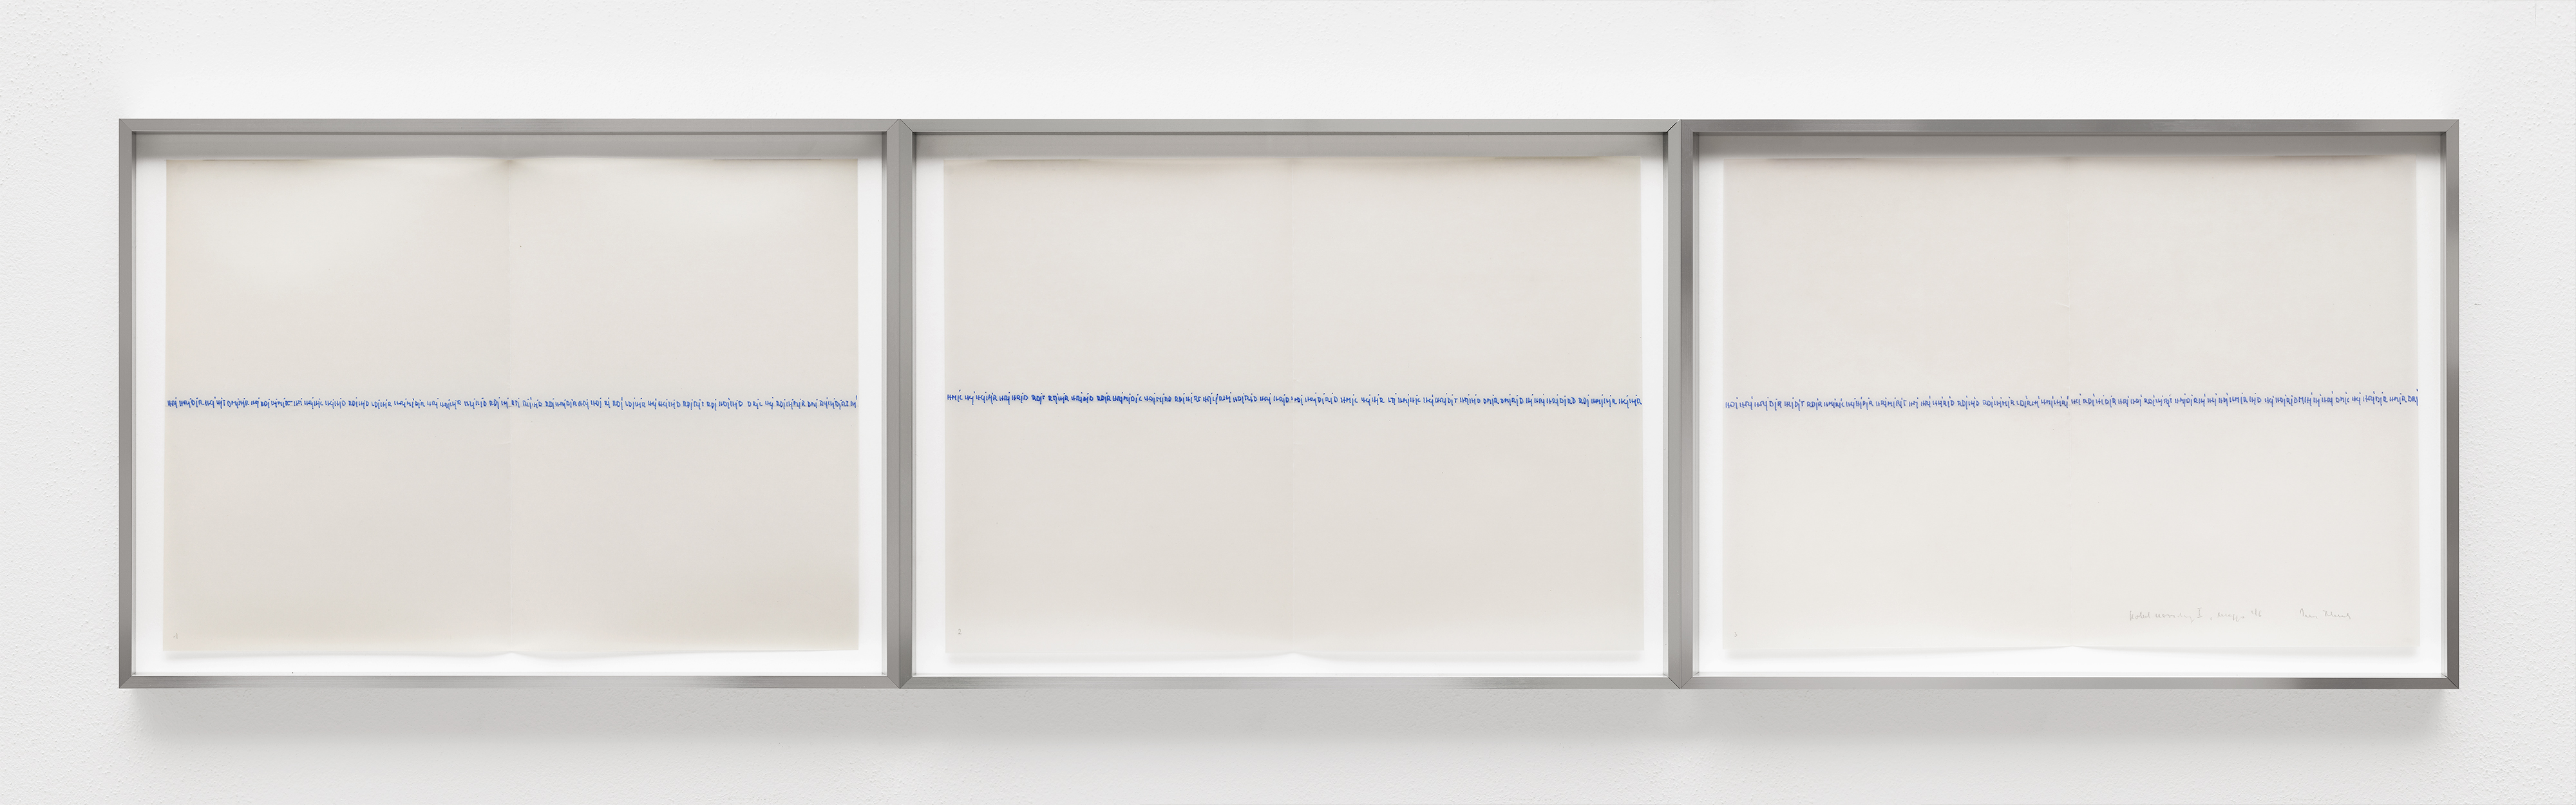 Irma Blank, Global Crossing I, marker on transparent paper, 3 pages, 29.5 x 42 cm each, 2016